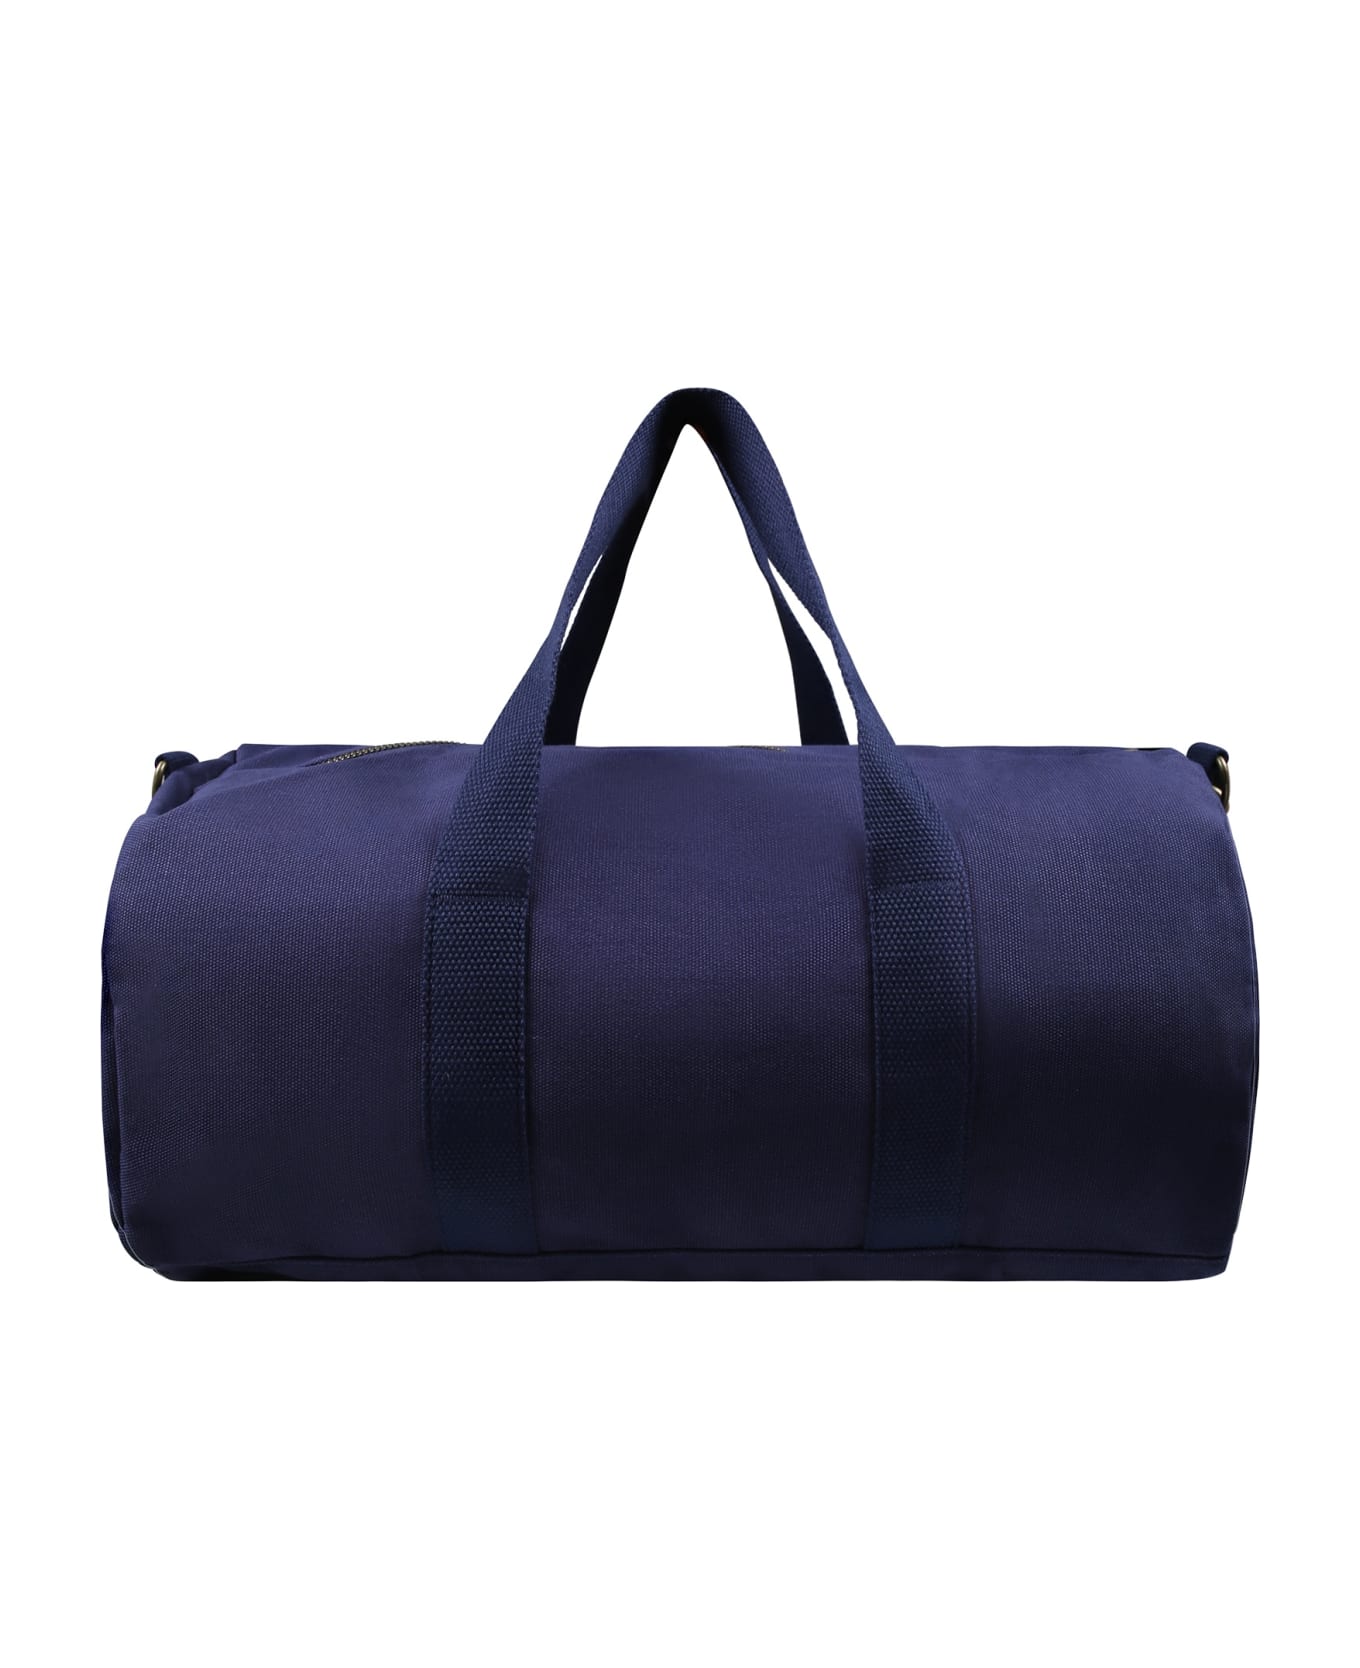 Ralph Lauren Blue Suitcase For Kids With Logo - Blue アクセサリー＆ギフト